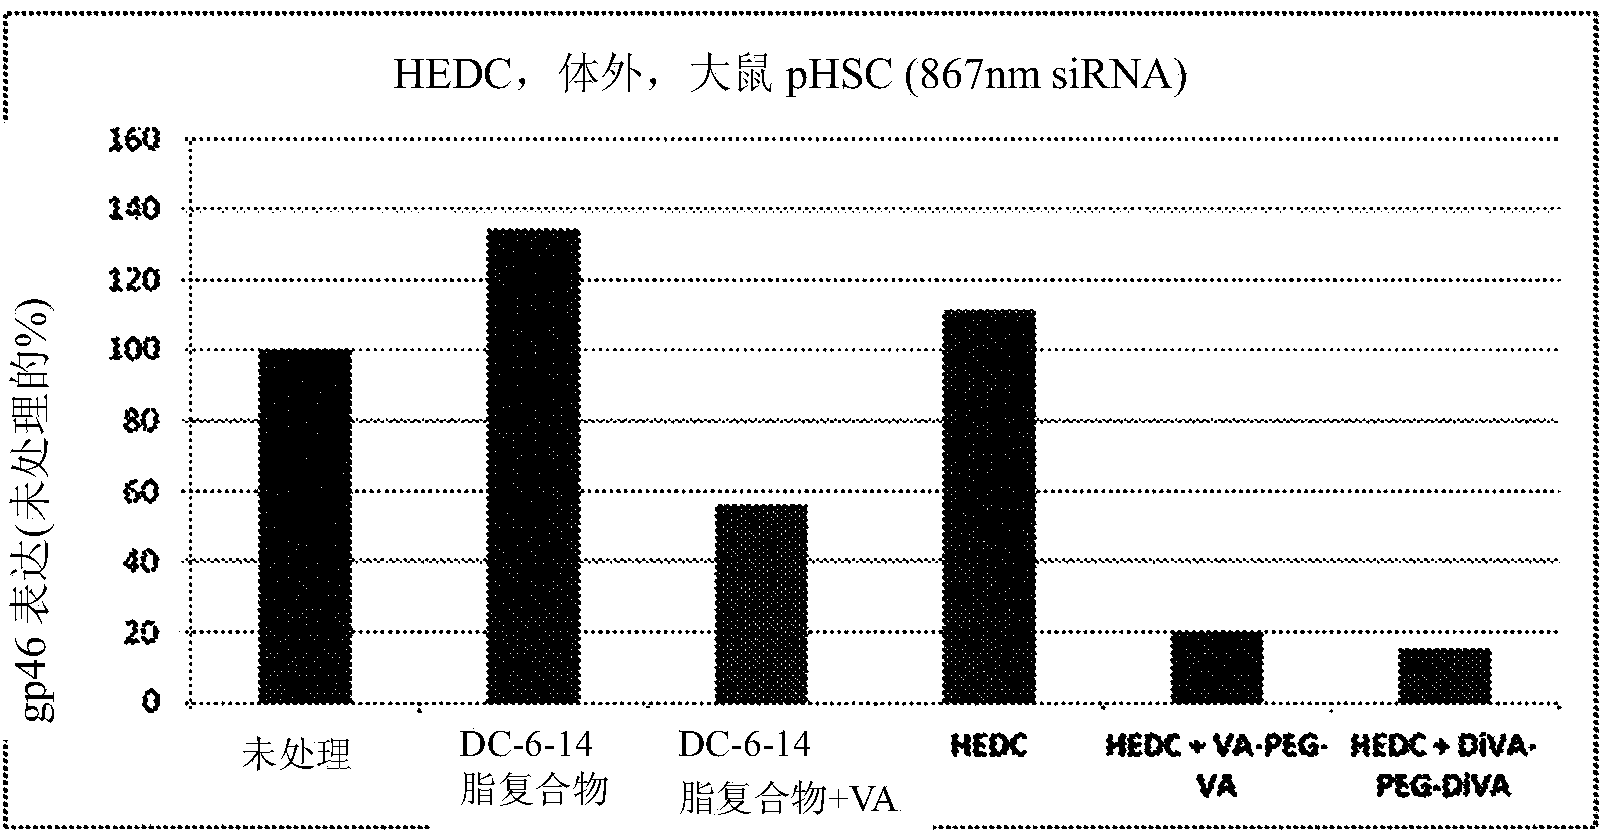 Compounds for targeting drug delivery and enhancing siRNA activity